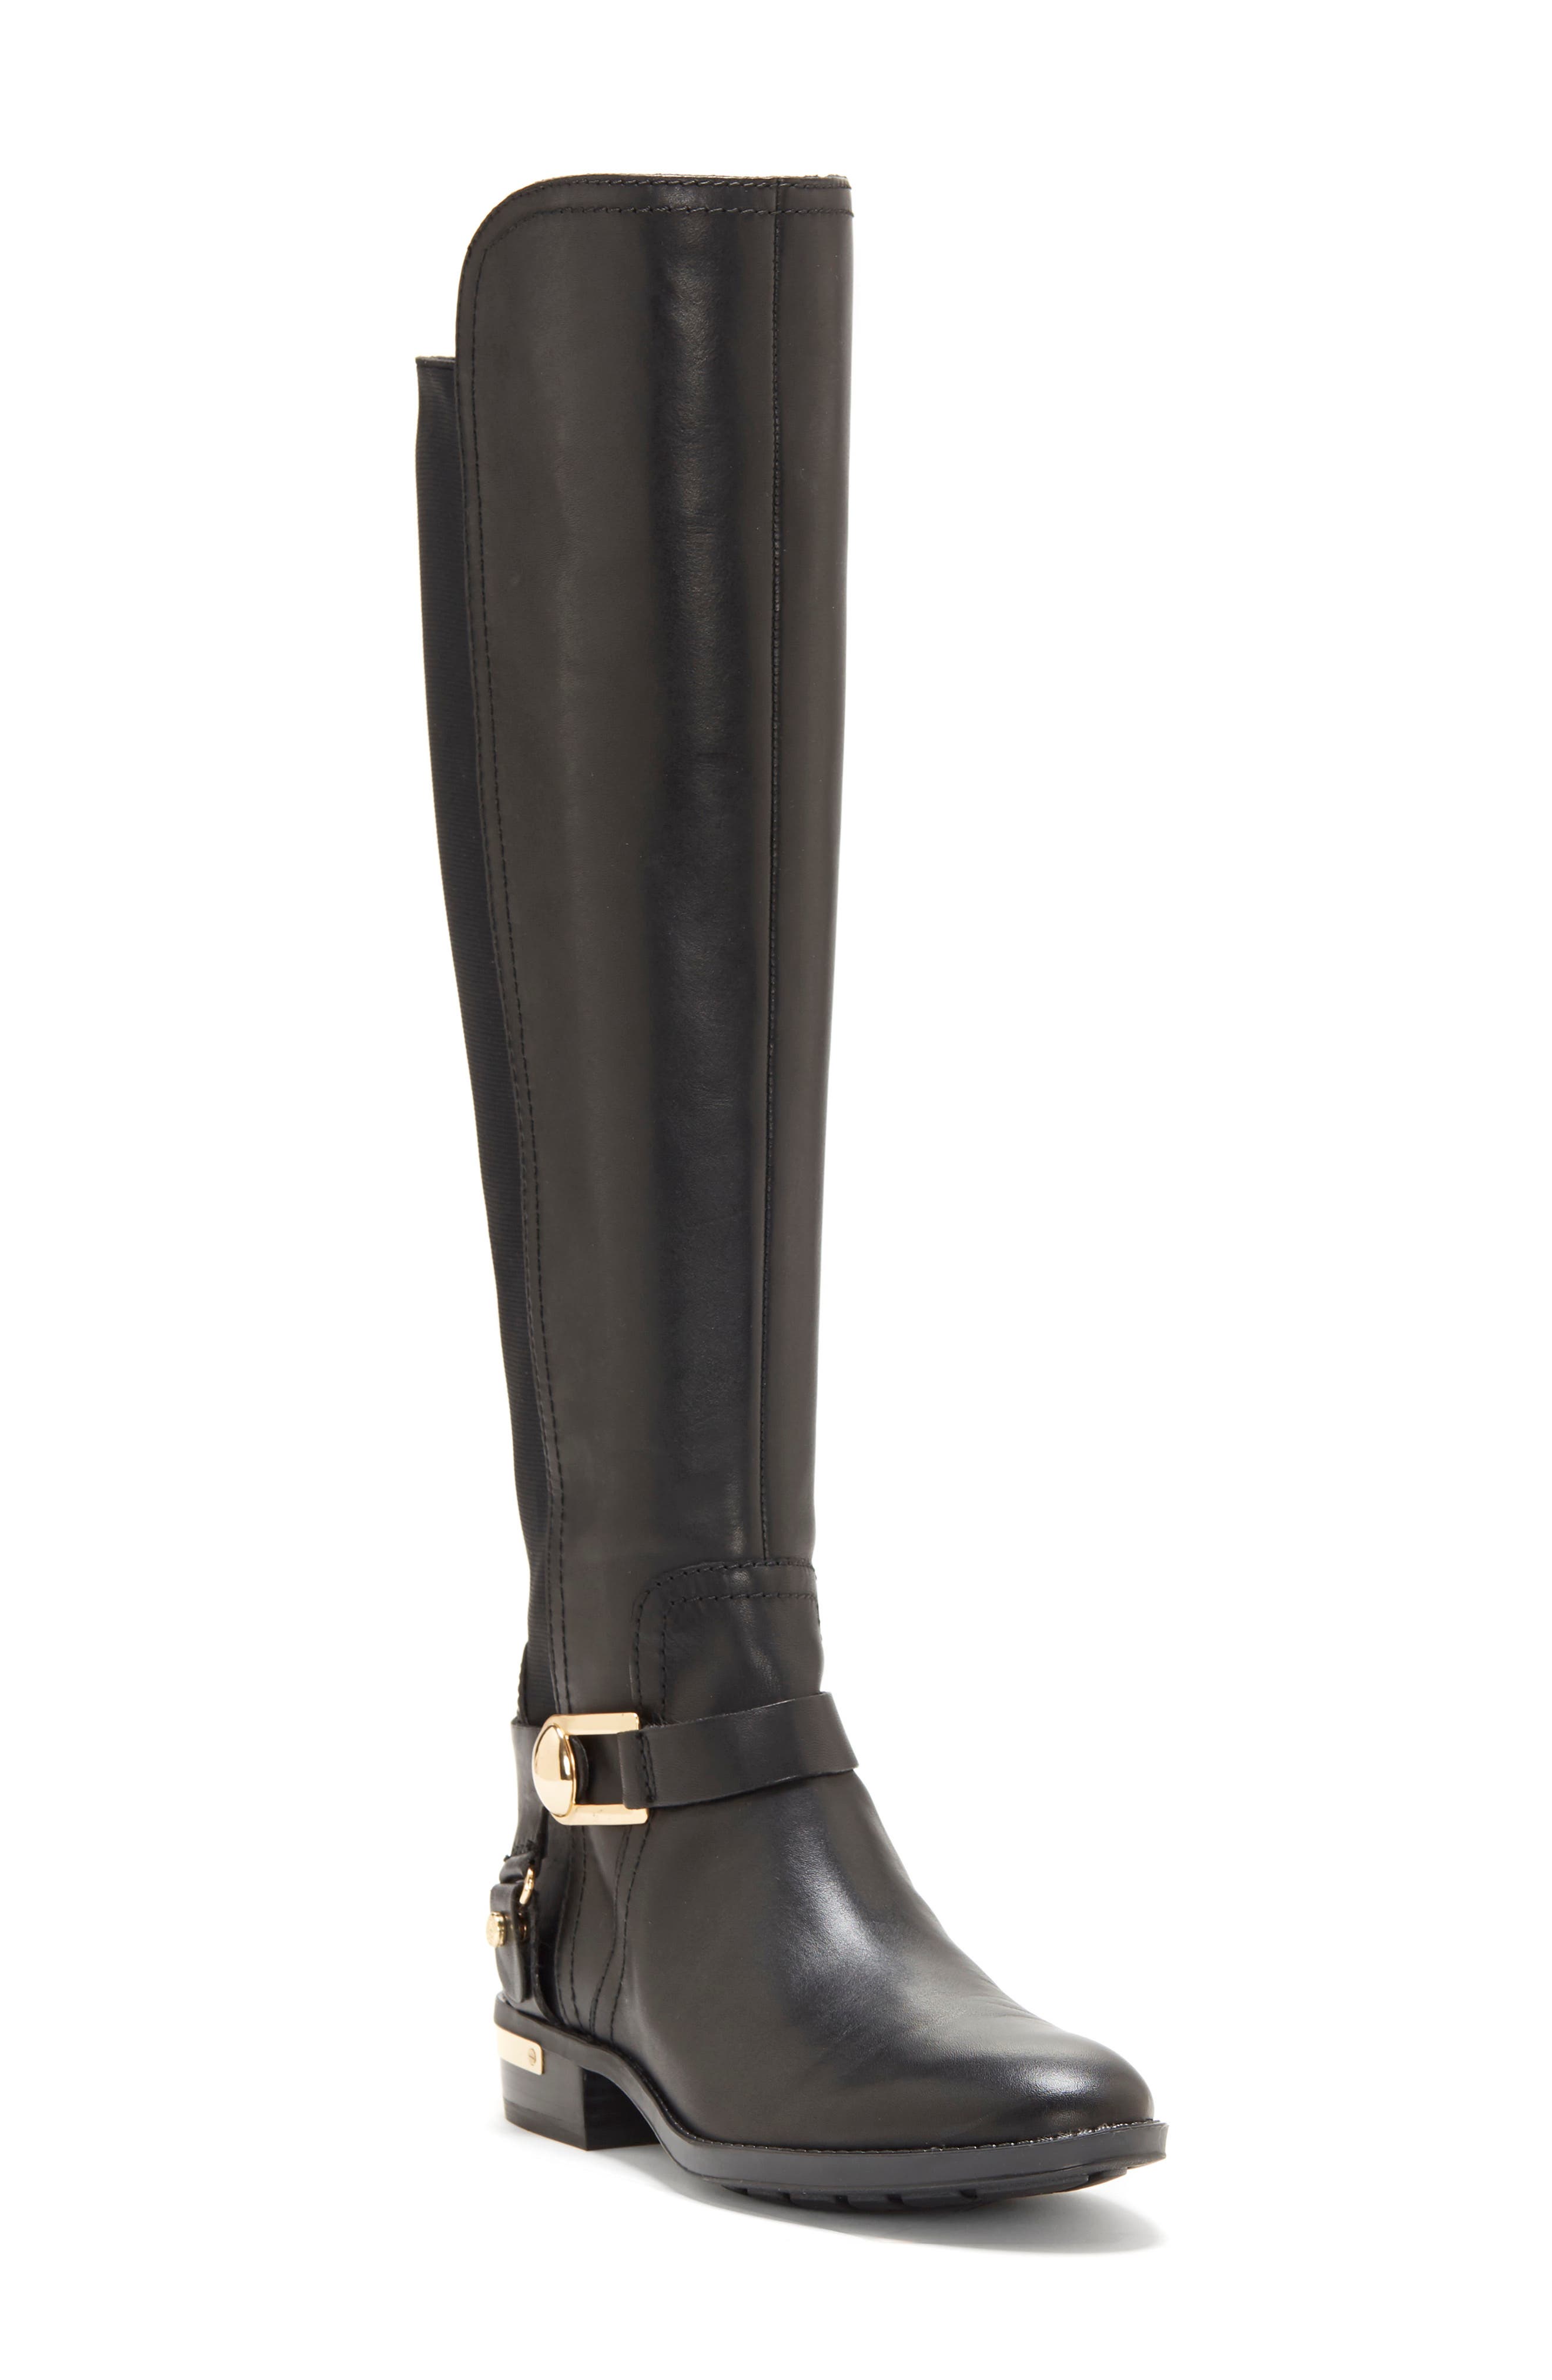 Vince Camuto Pearley Knee High Riding 